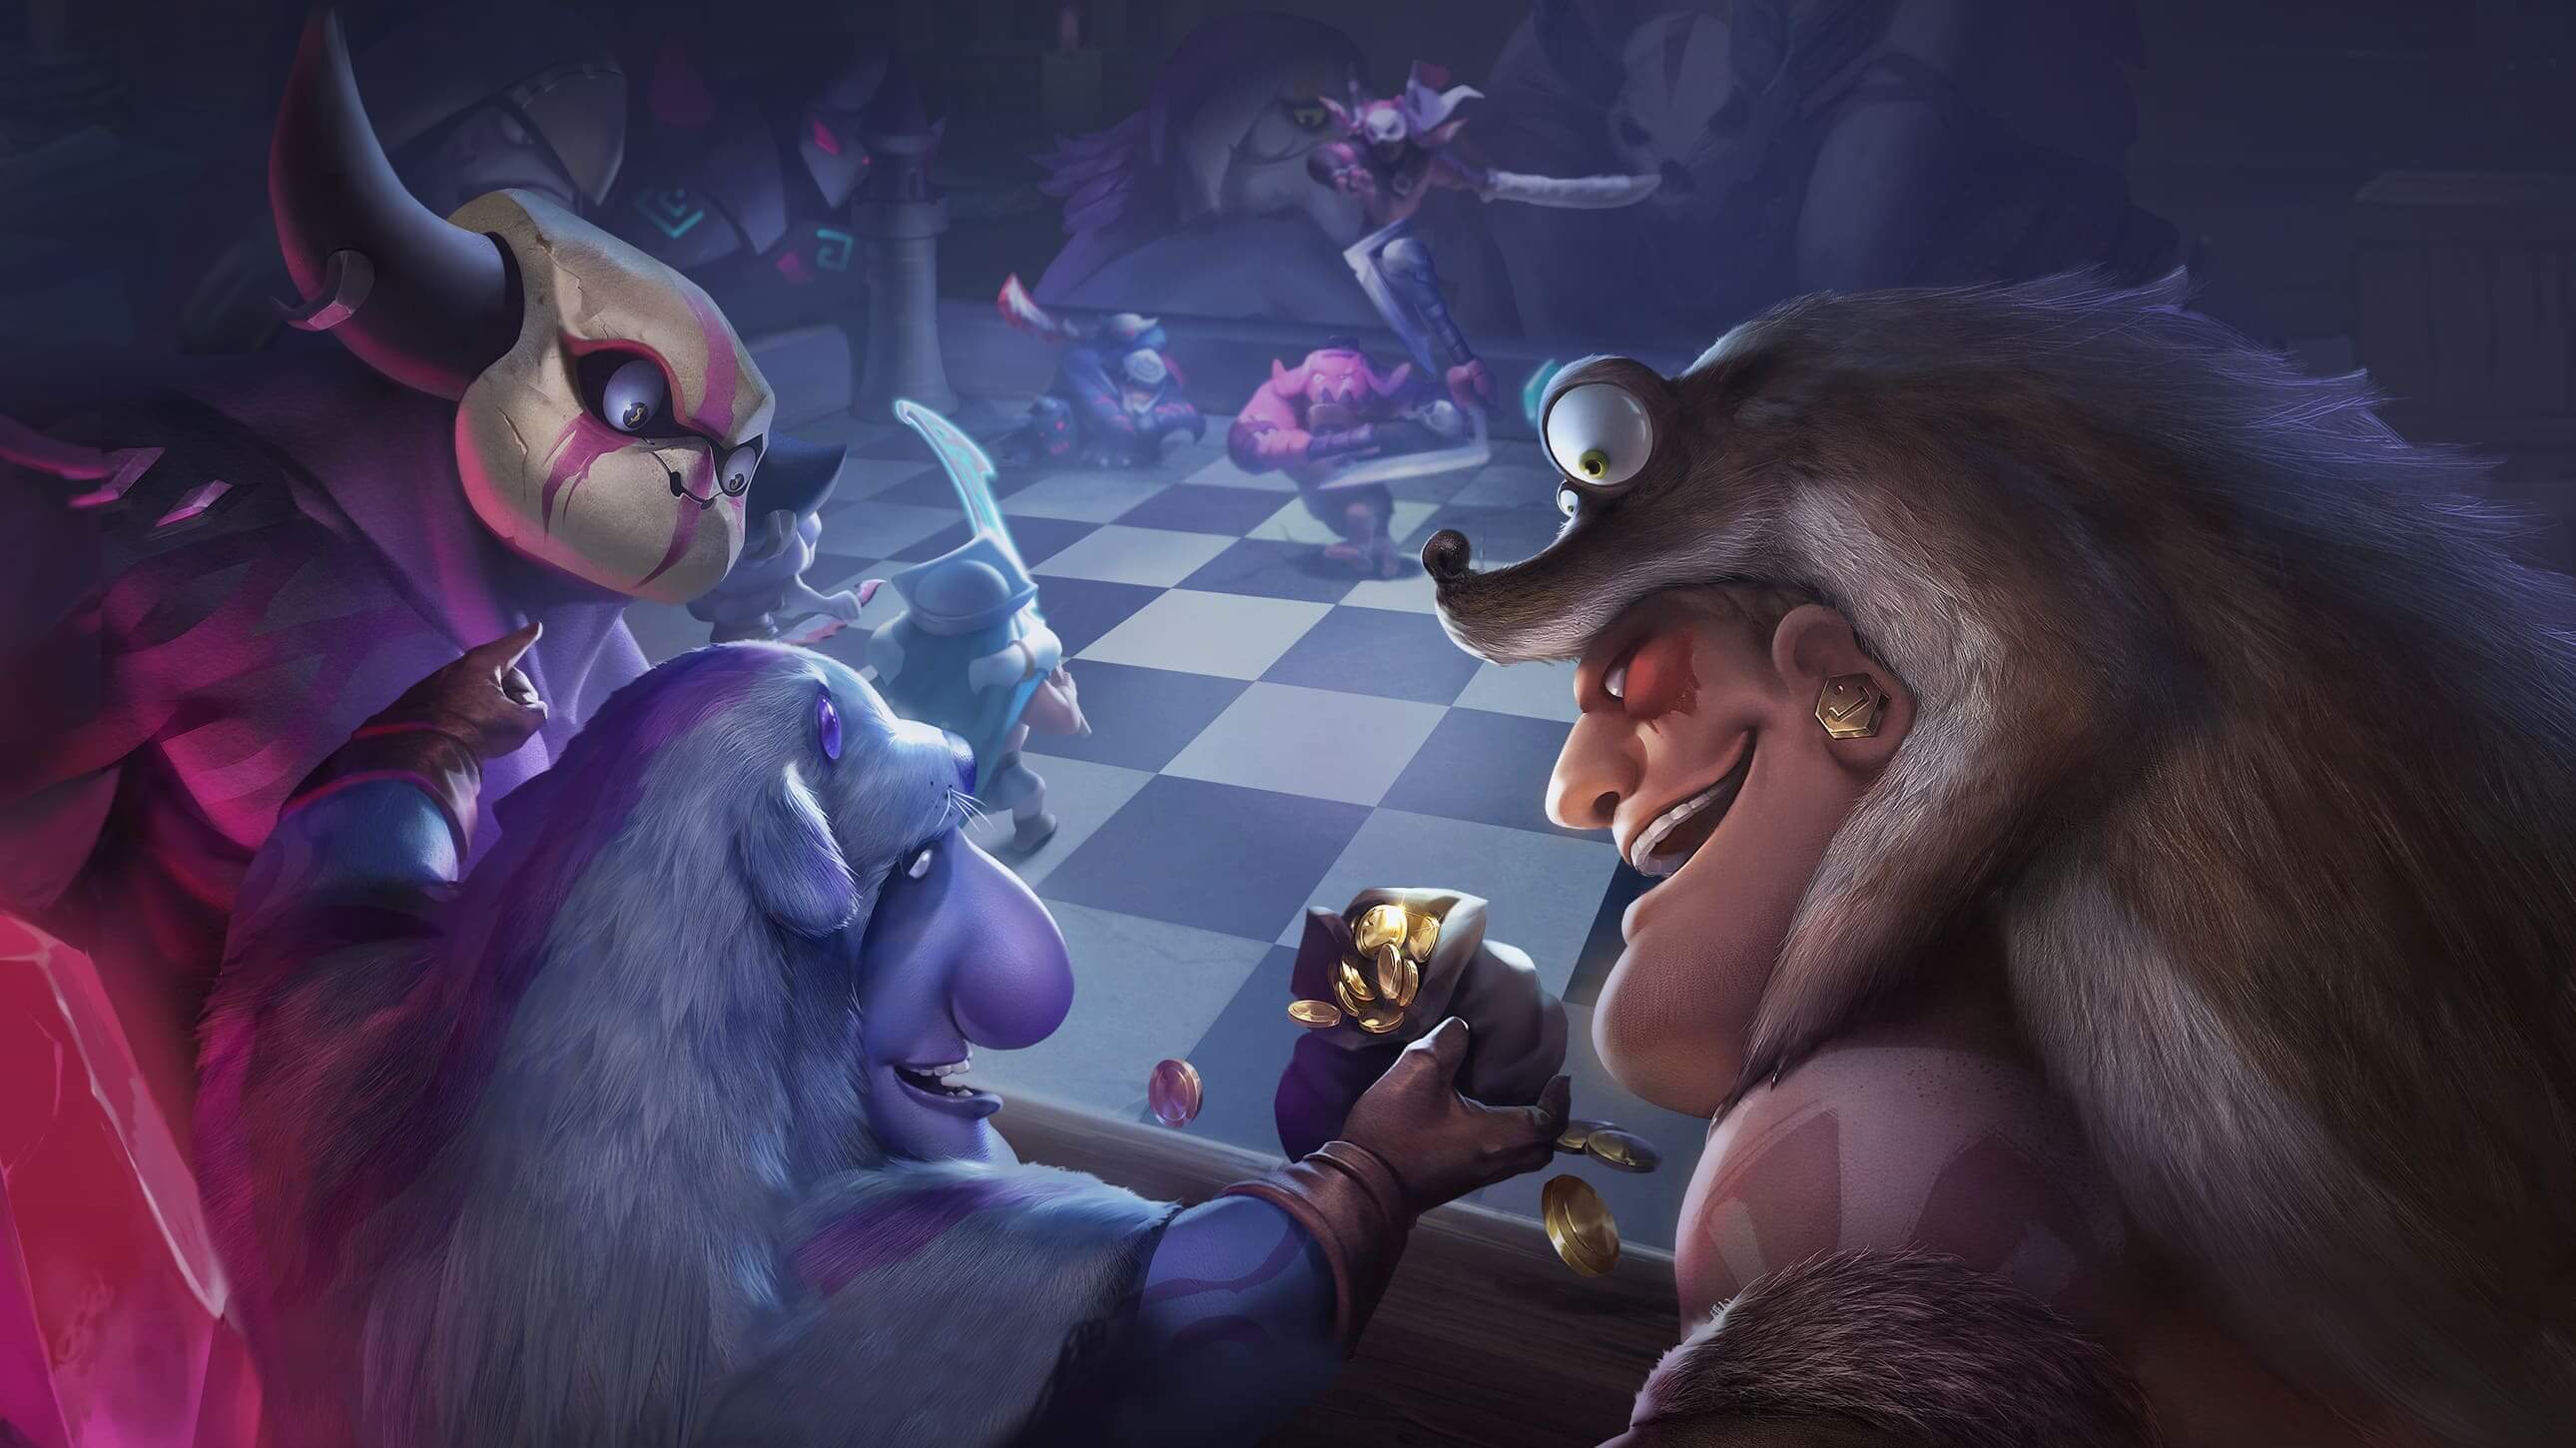 auto chess ps4 review